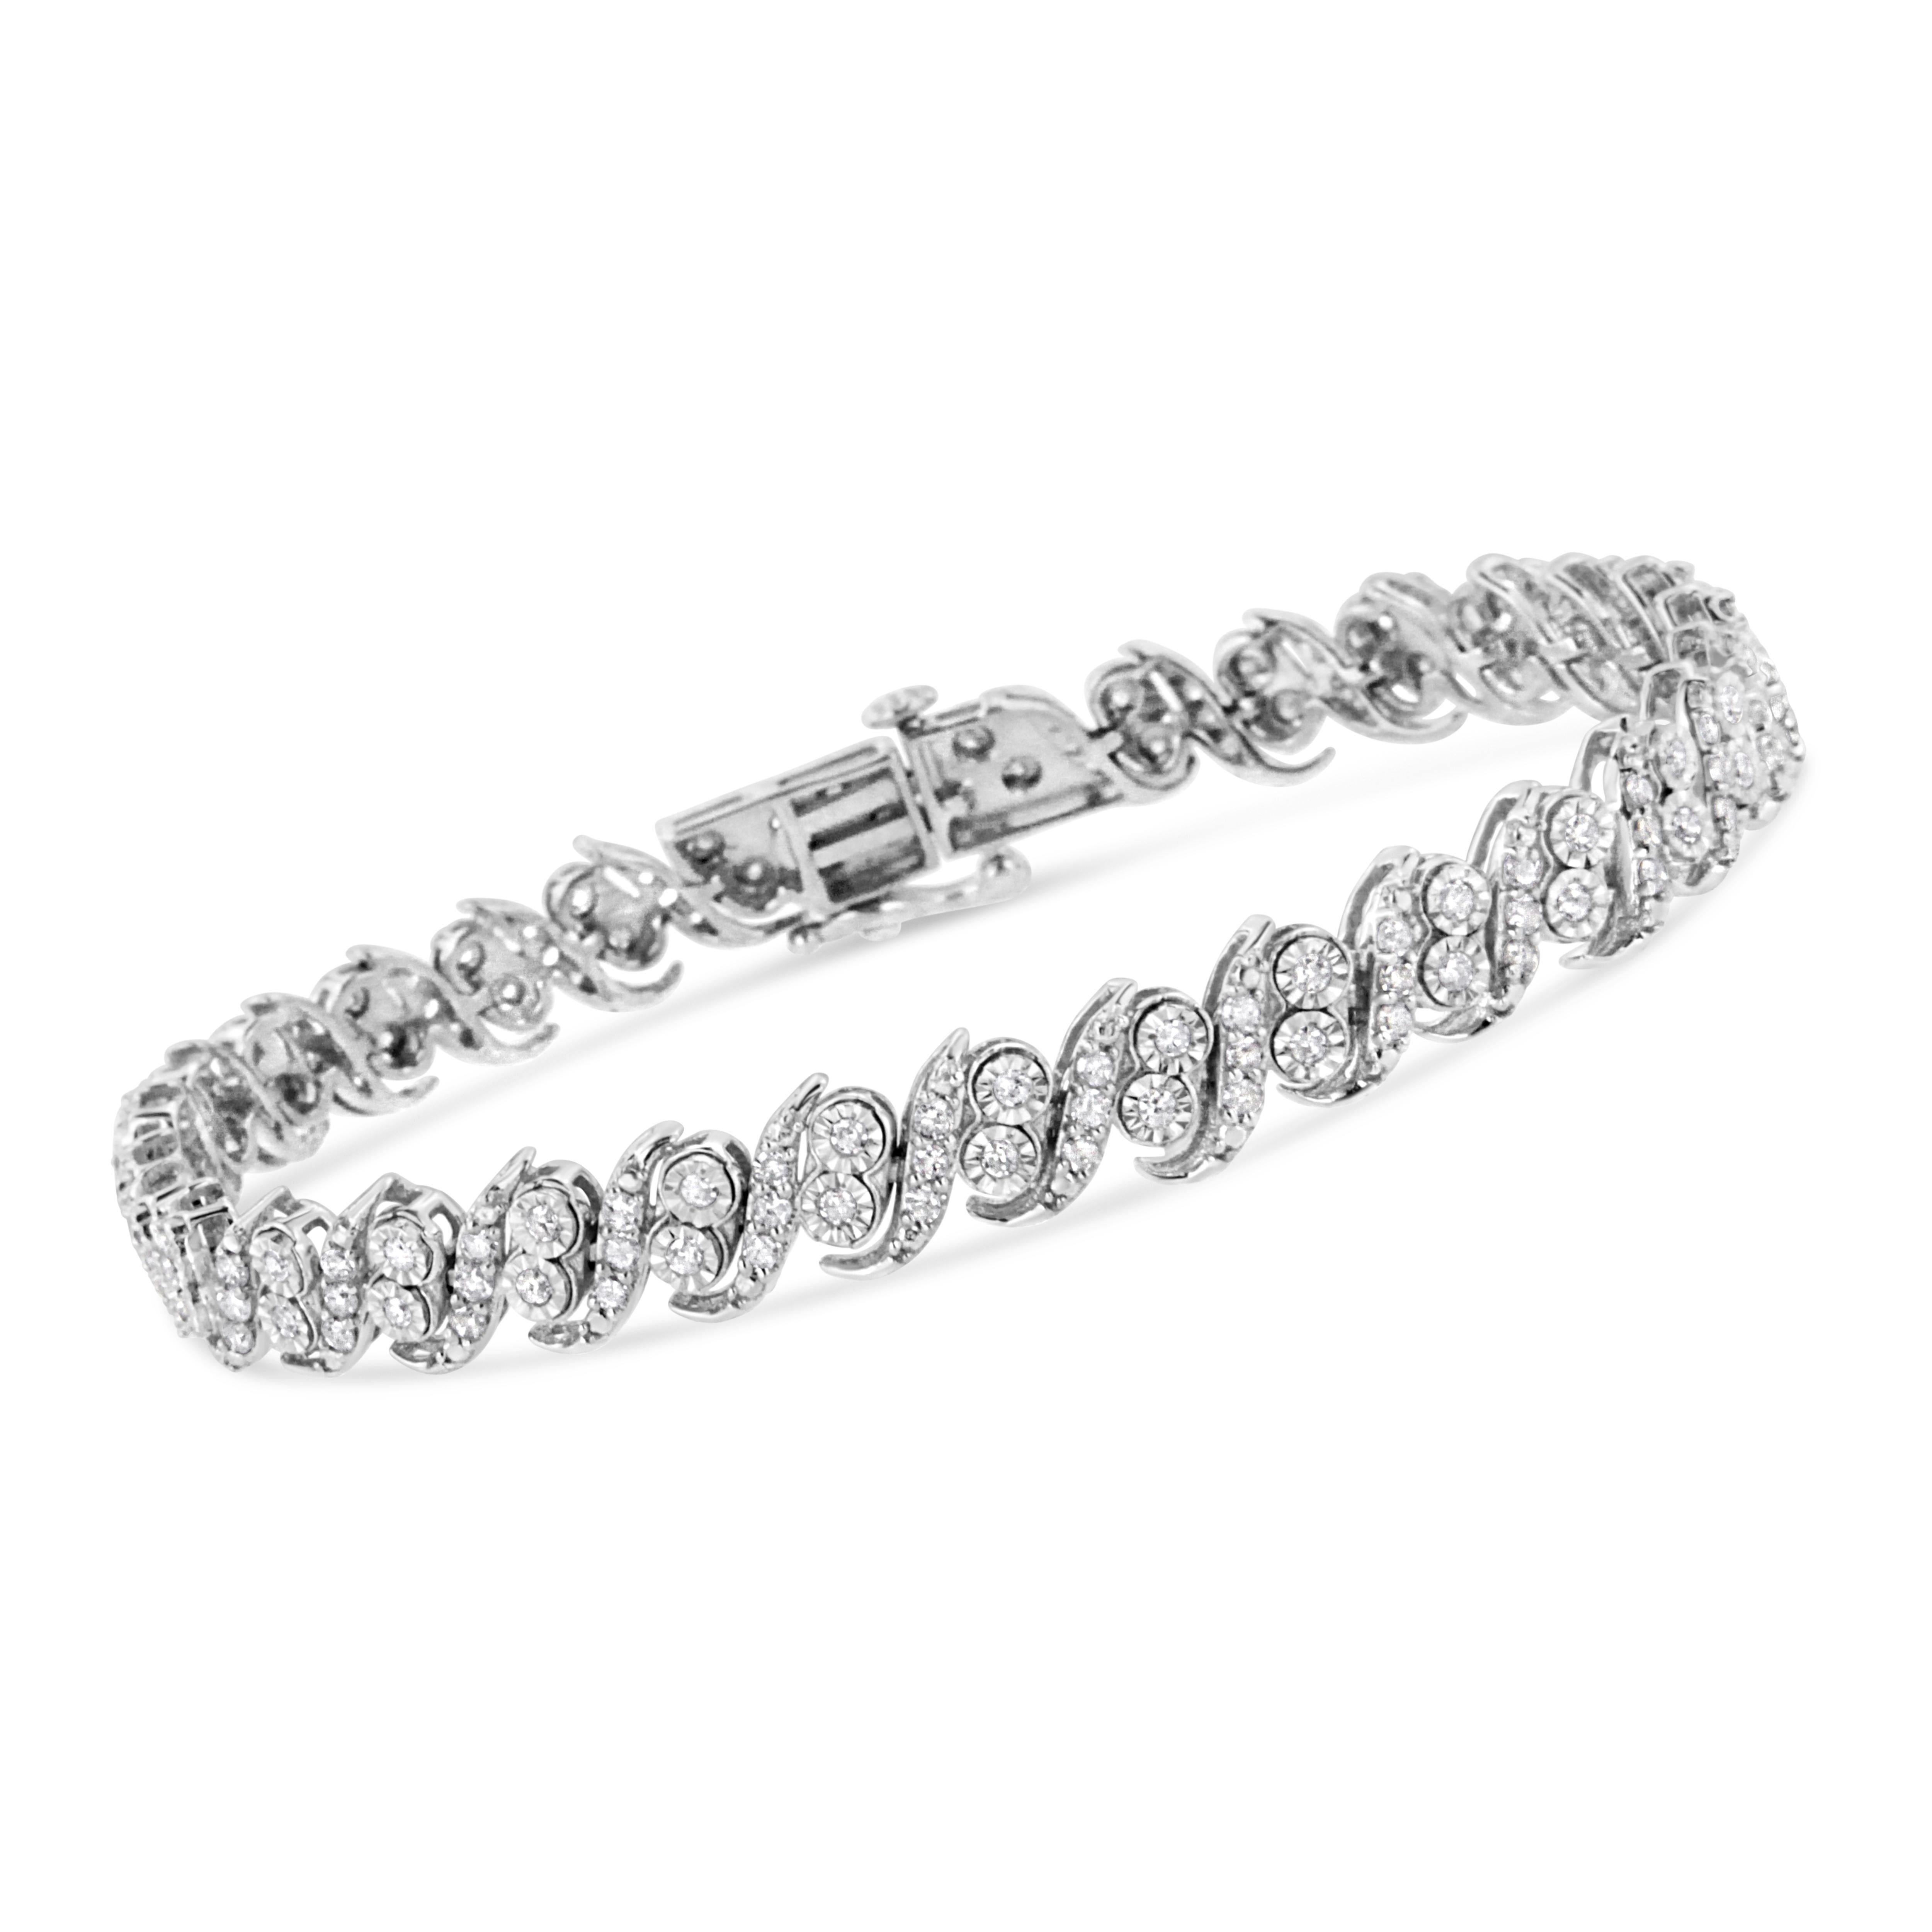 Glamorous yet timeless, this beautiful tennis bracelet has a unique pattern of alternating studded silver 